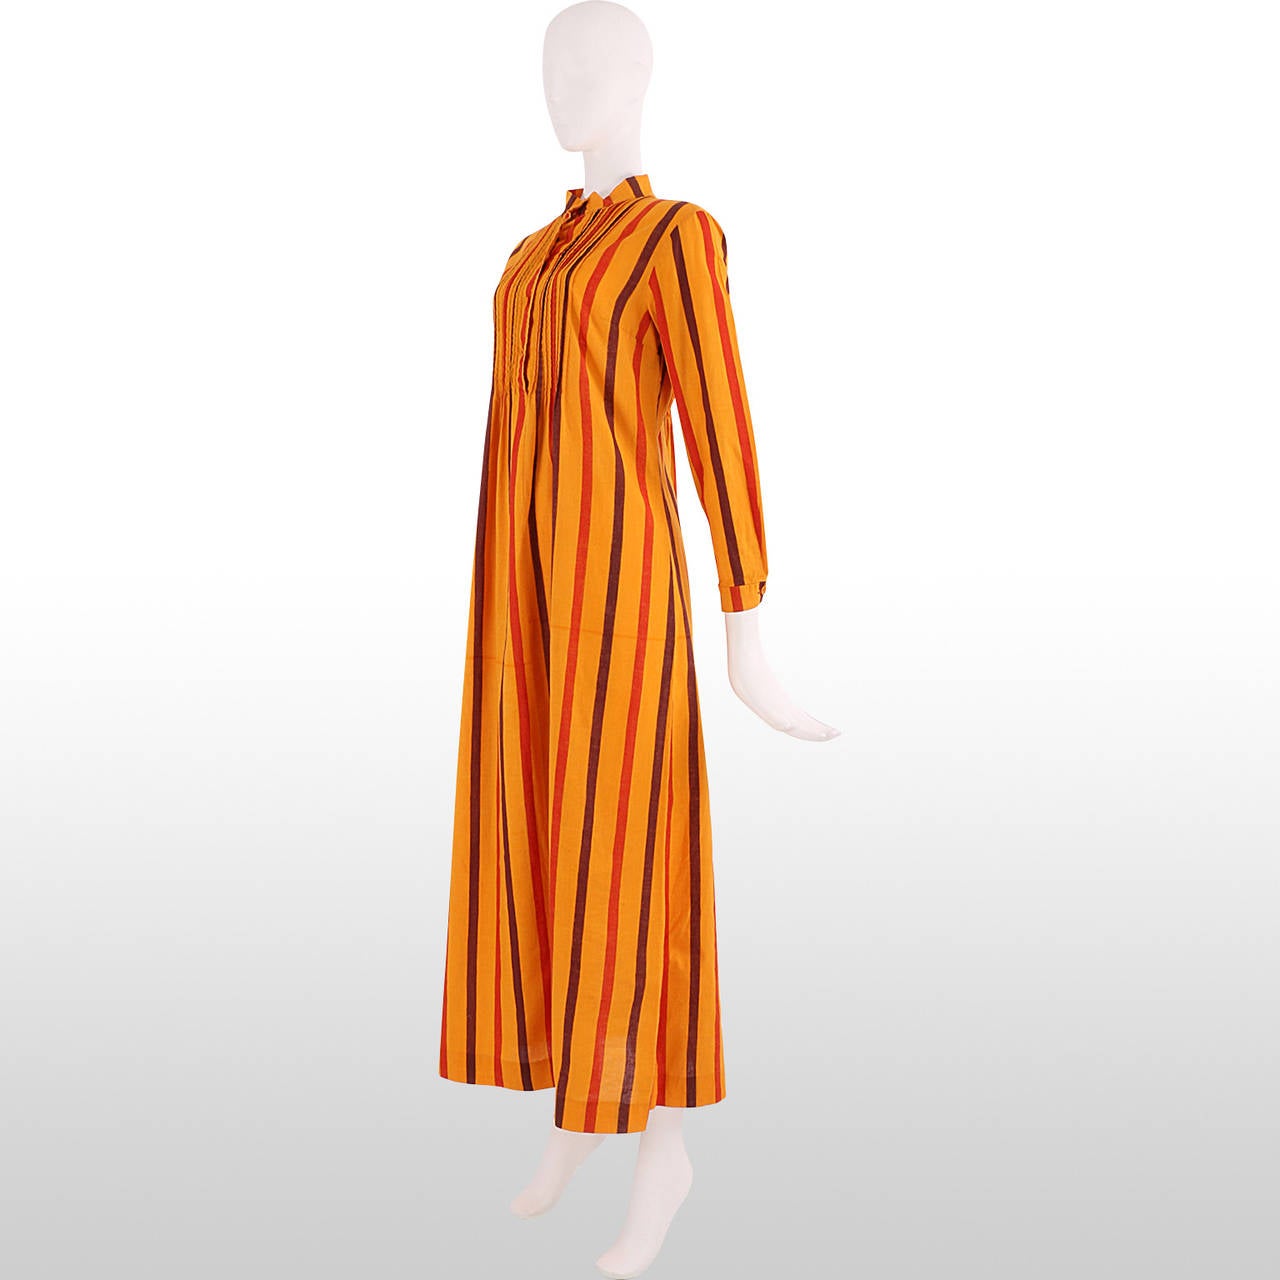 This 1970's piece by Marimekko is great for a summer festival or holiday wear. Made from striped printed cotton in oranges and brown it has a high standing collar and button down neckline. The bodice is has pleated panelling at the front and back.